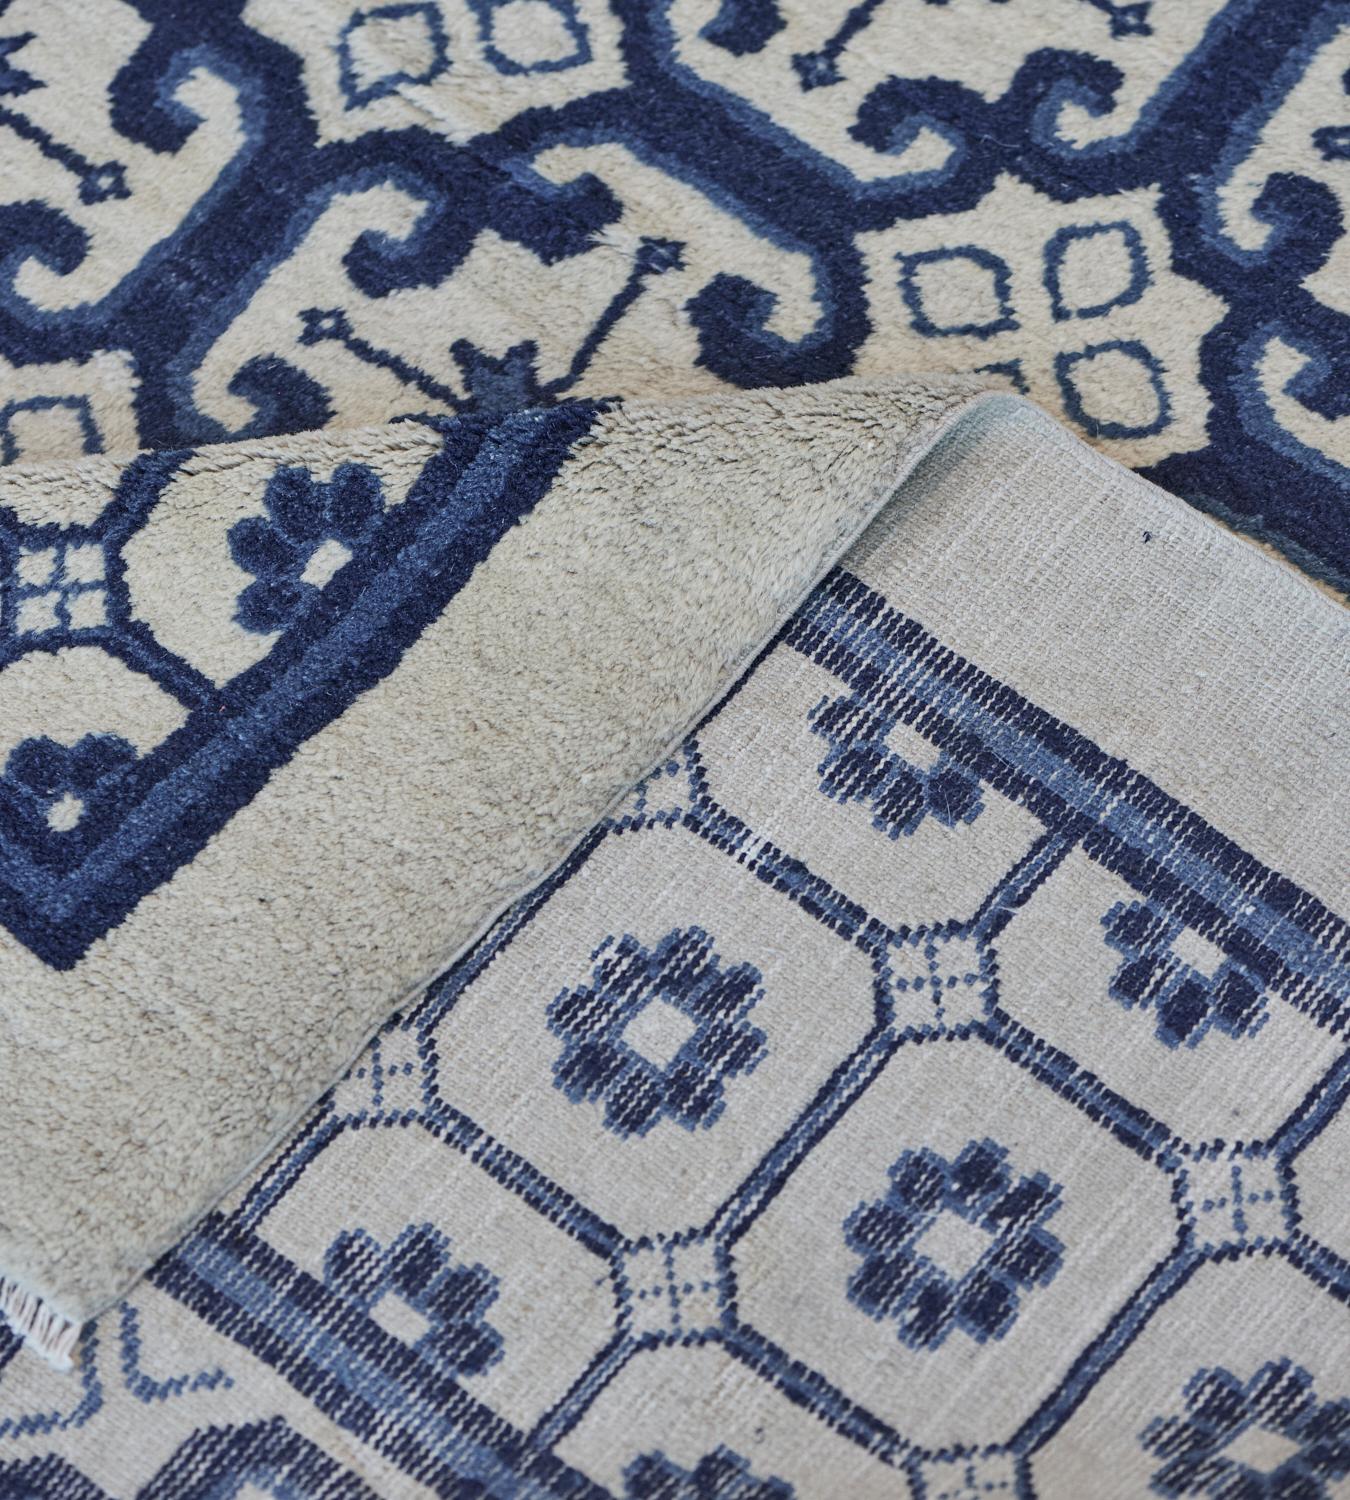 This antique, circa 1900, Chinese Peking rug features a field with an overall design of vertical rows of indigo-blue stepped lozenges each containing an ivory panel with a central light blue stellar flowerhead alternating with rows of ivory stellar